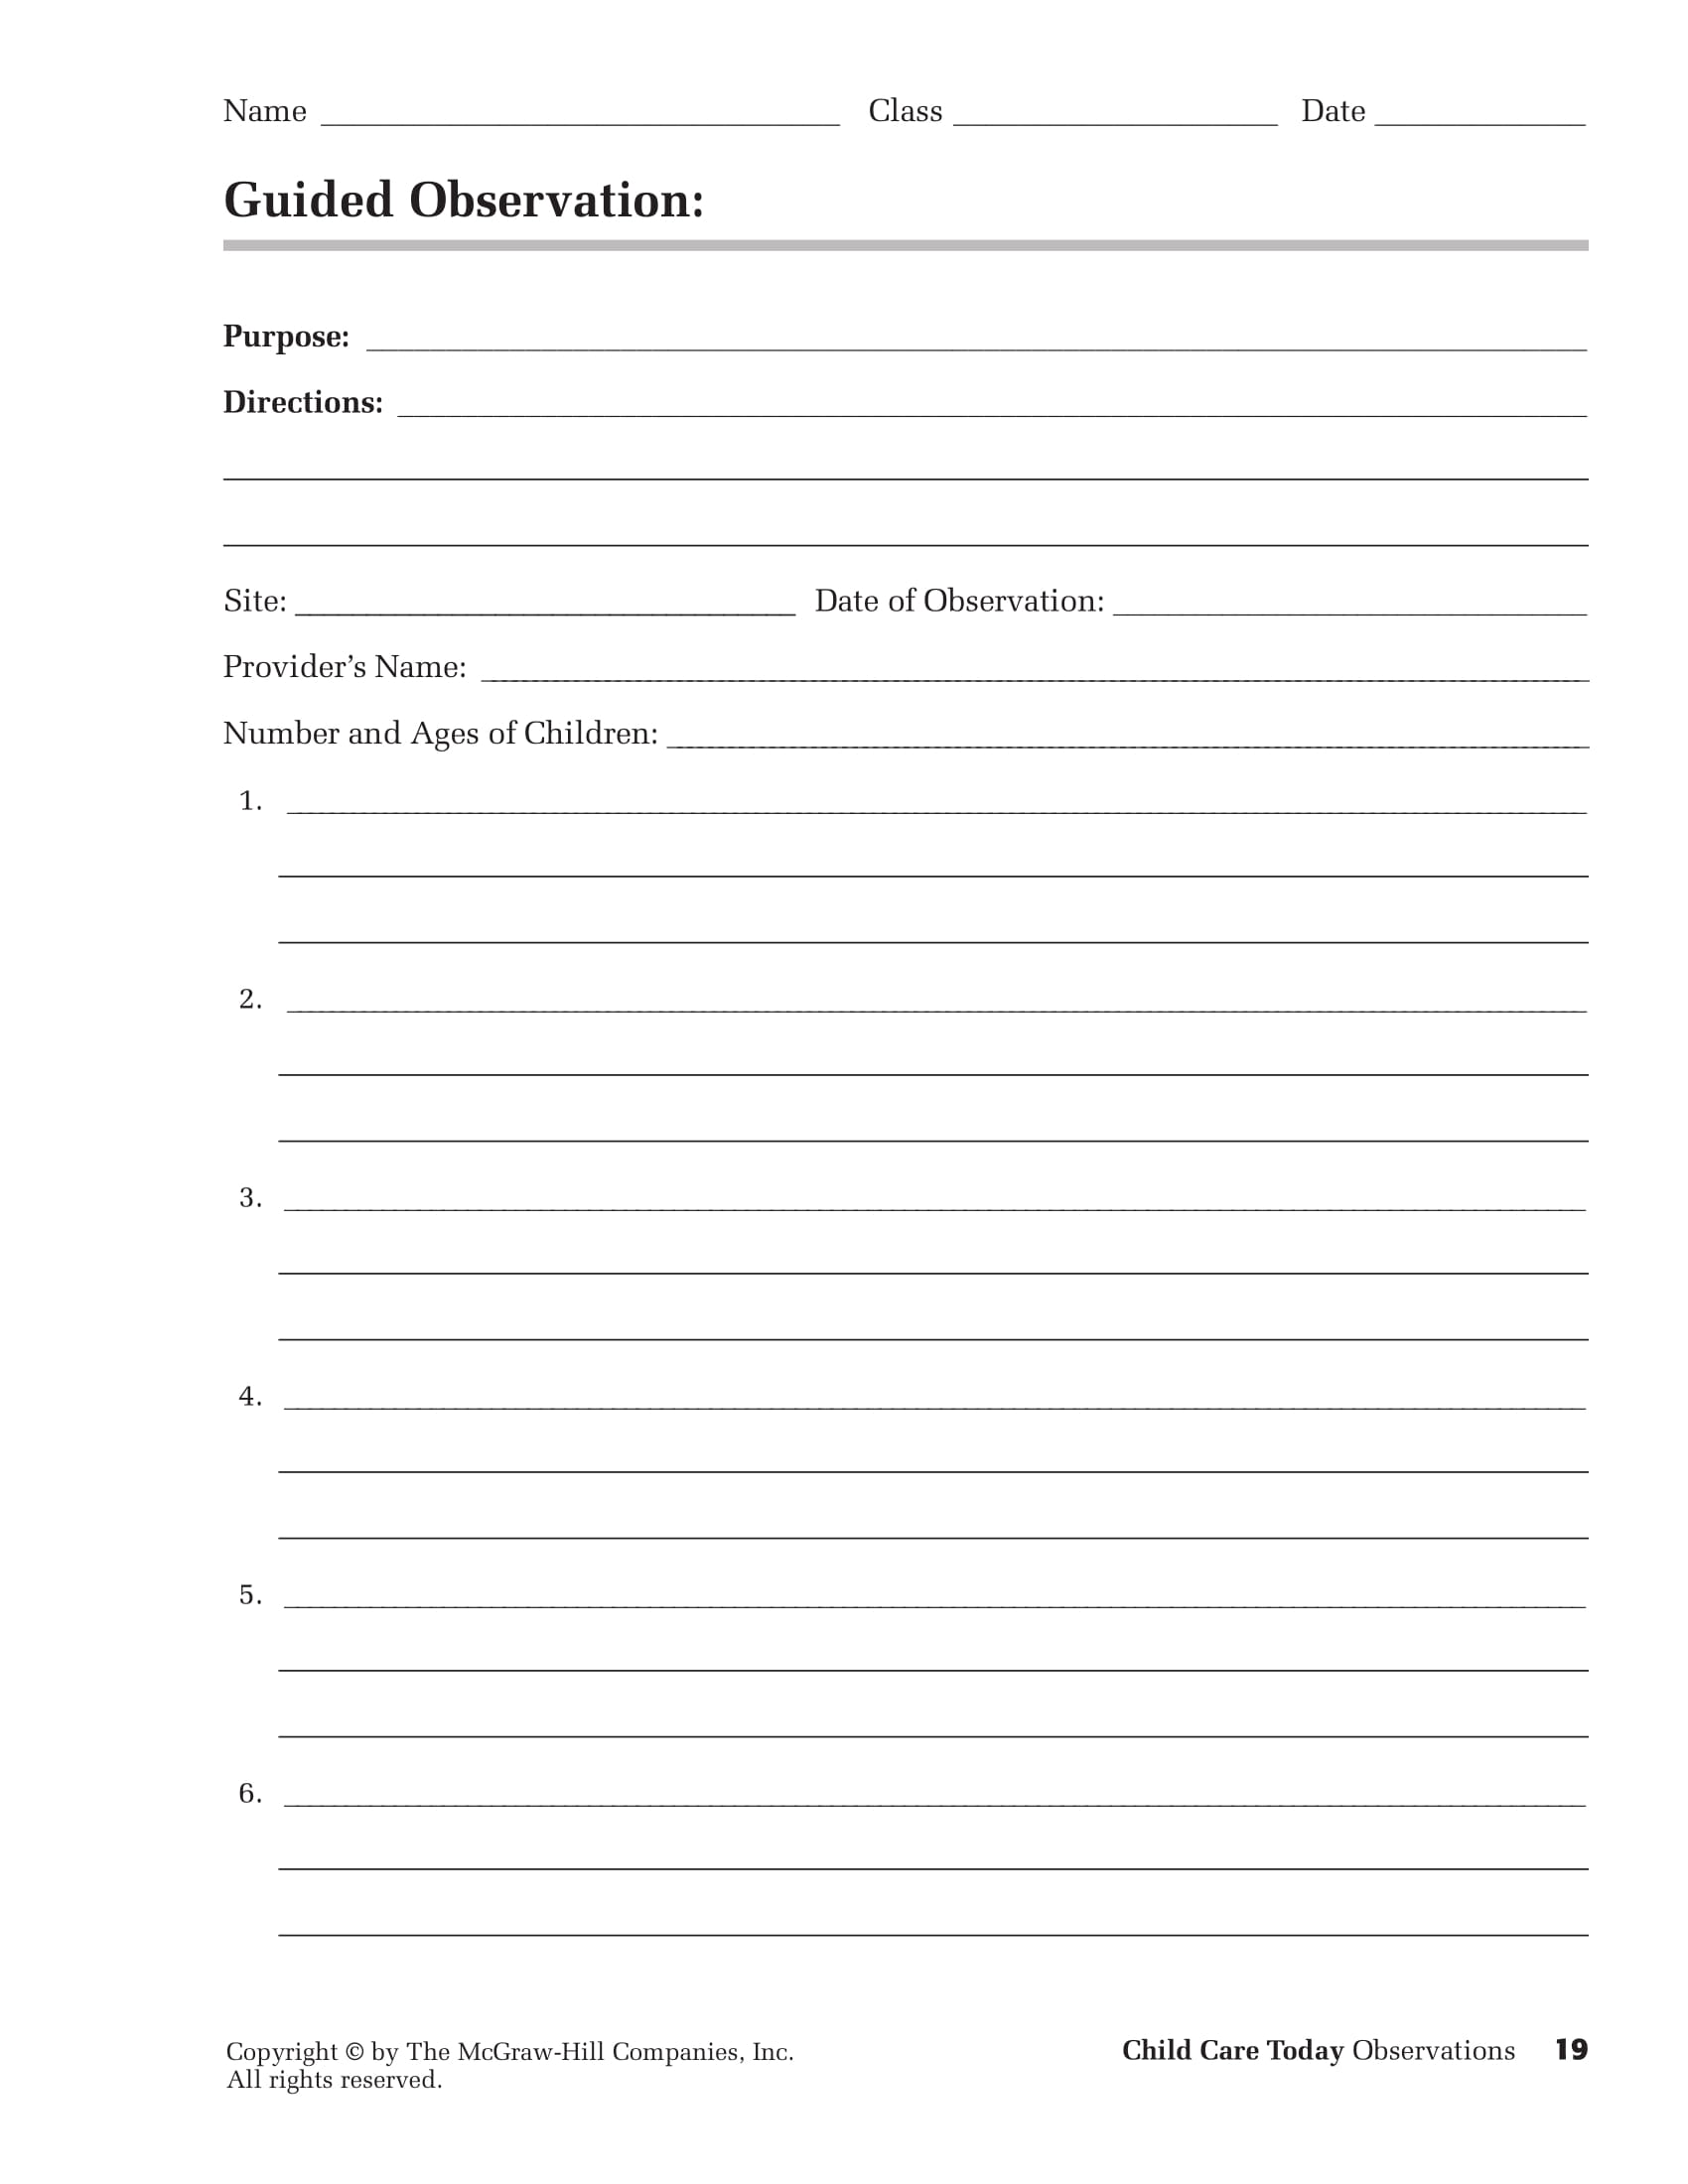 FREE 4+ Child Care Observation Forms in MS Word | PDF